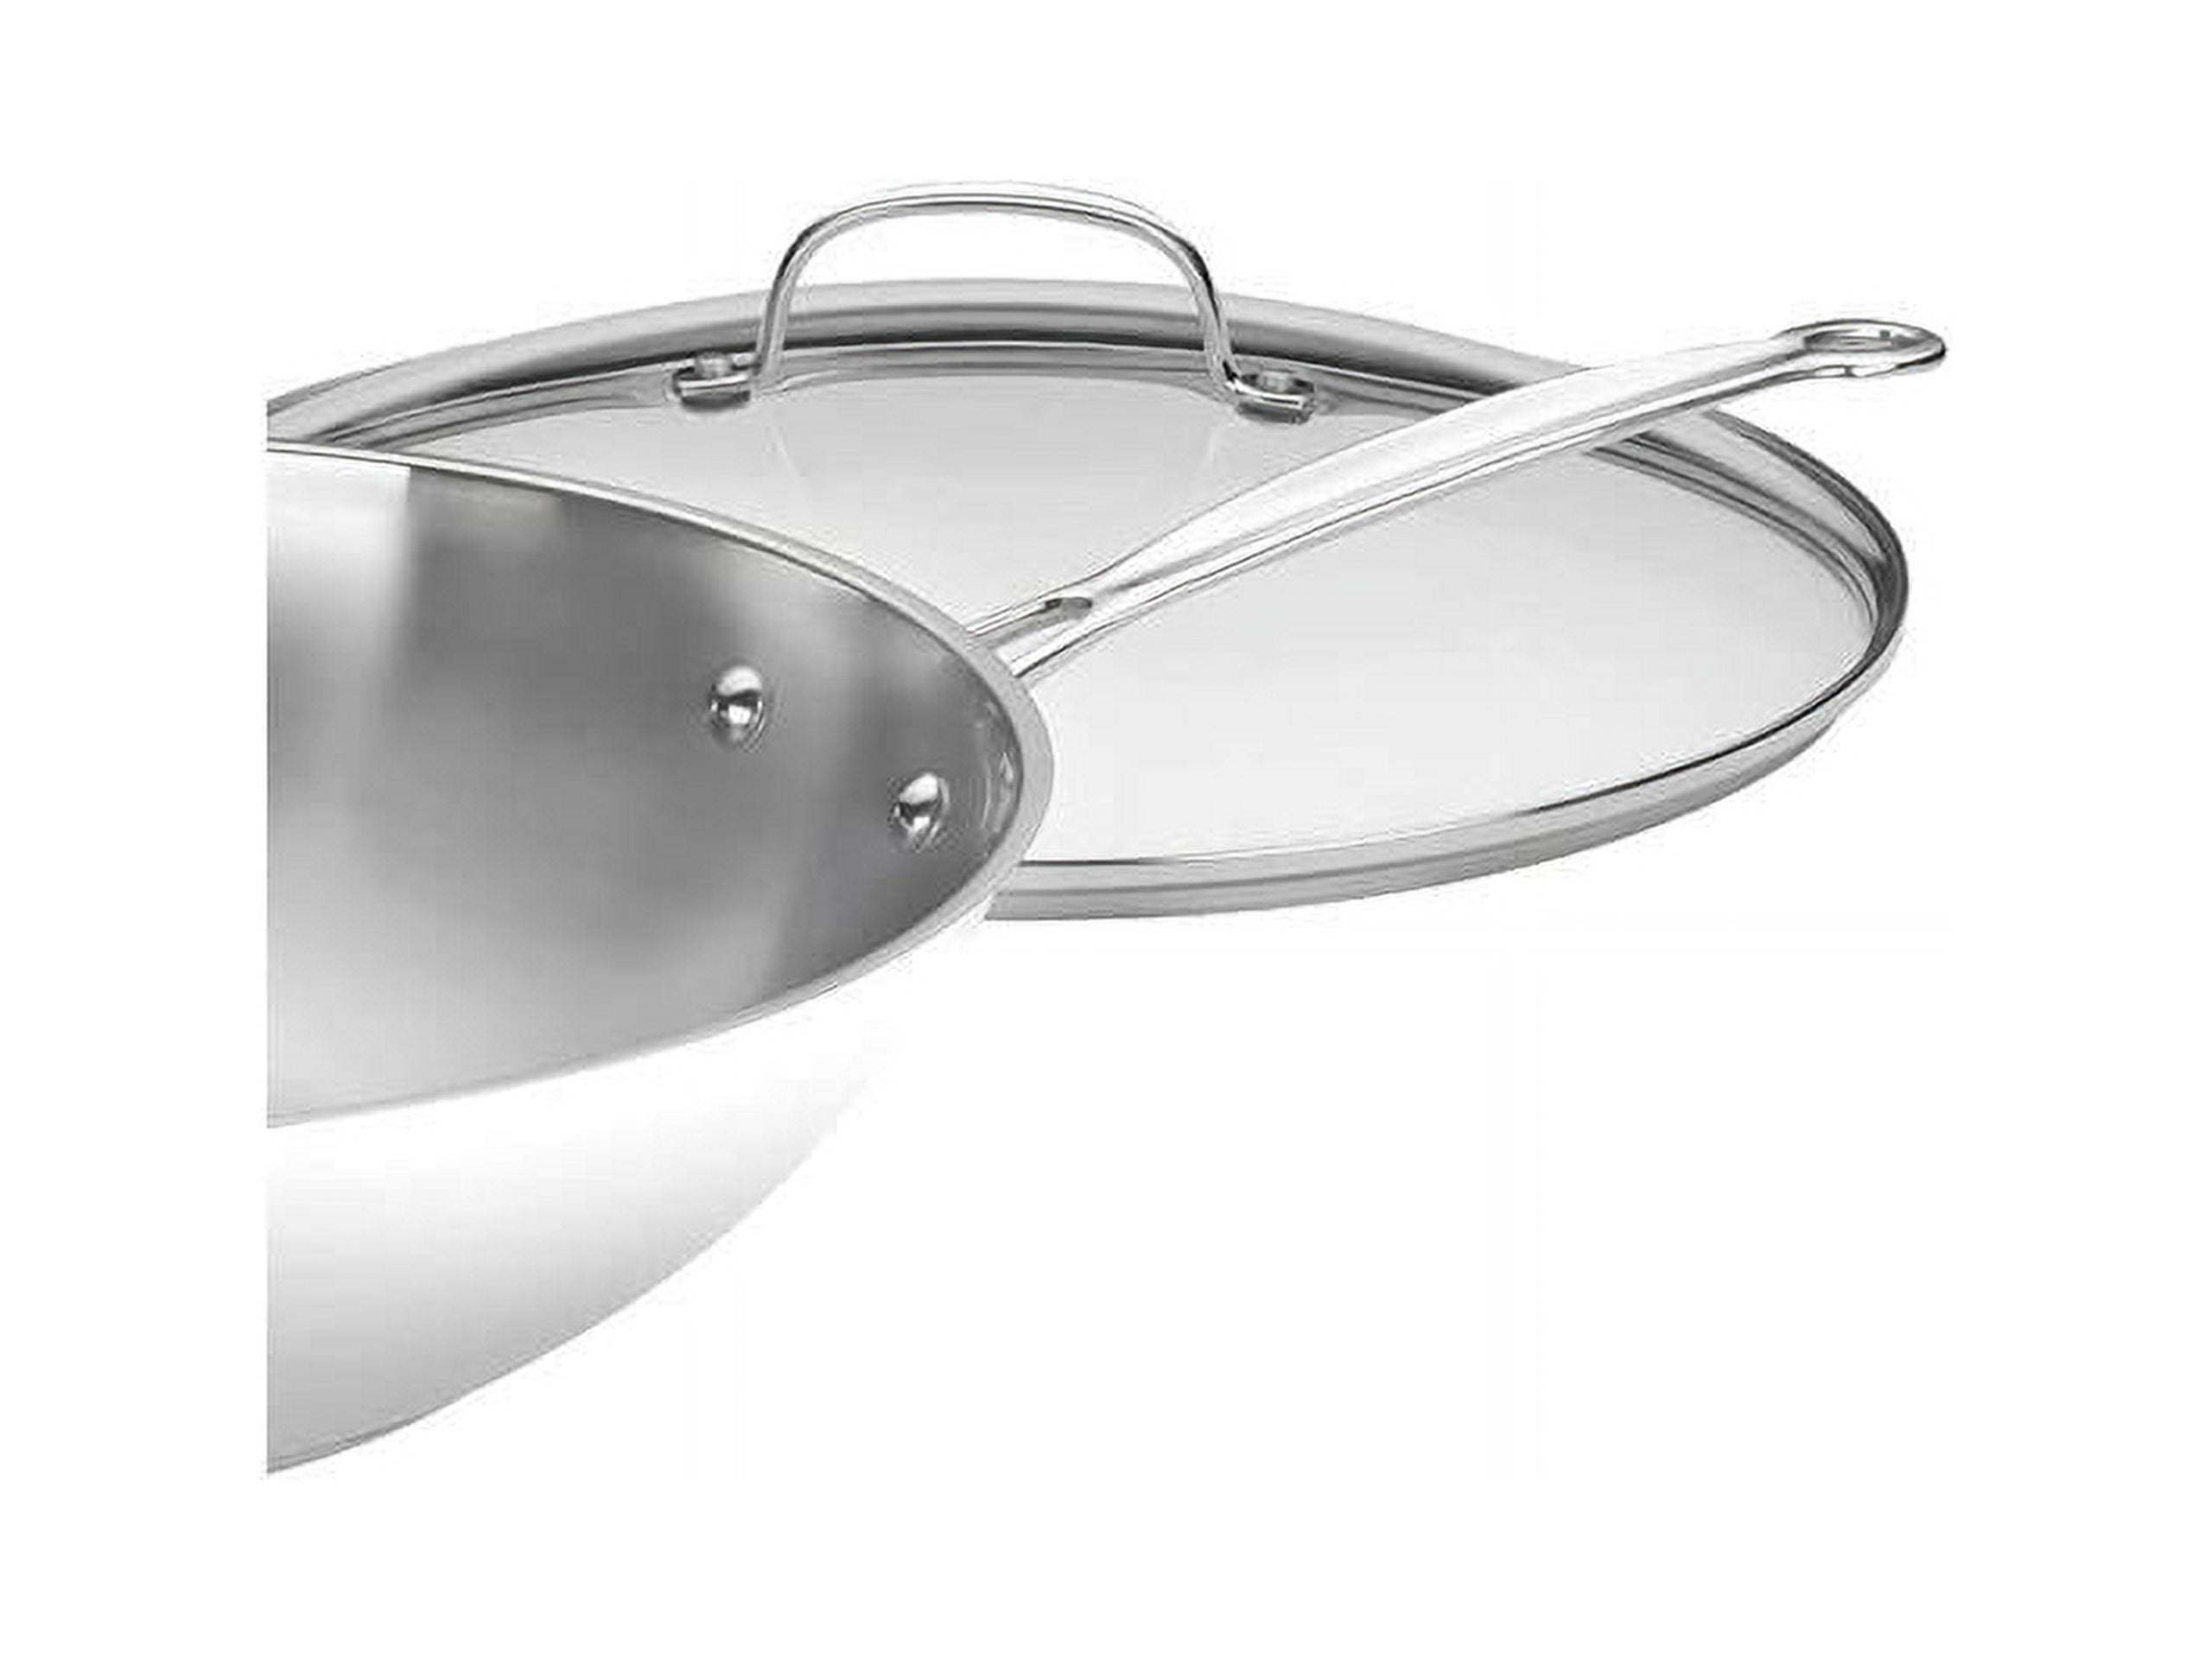 Cheftor Stainless Steel and Heat Resistant Glass Stir Fry Lid Cover for 14 Wok Pan and for 13 Classic Fry Pan